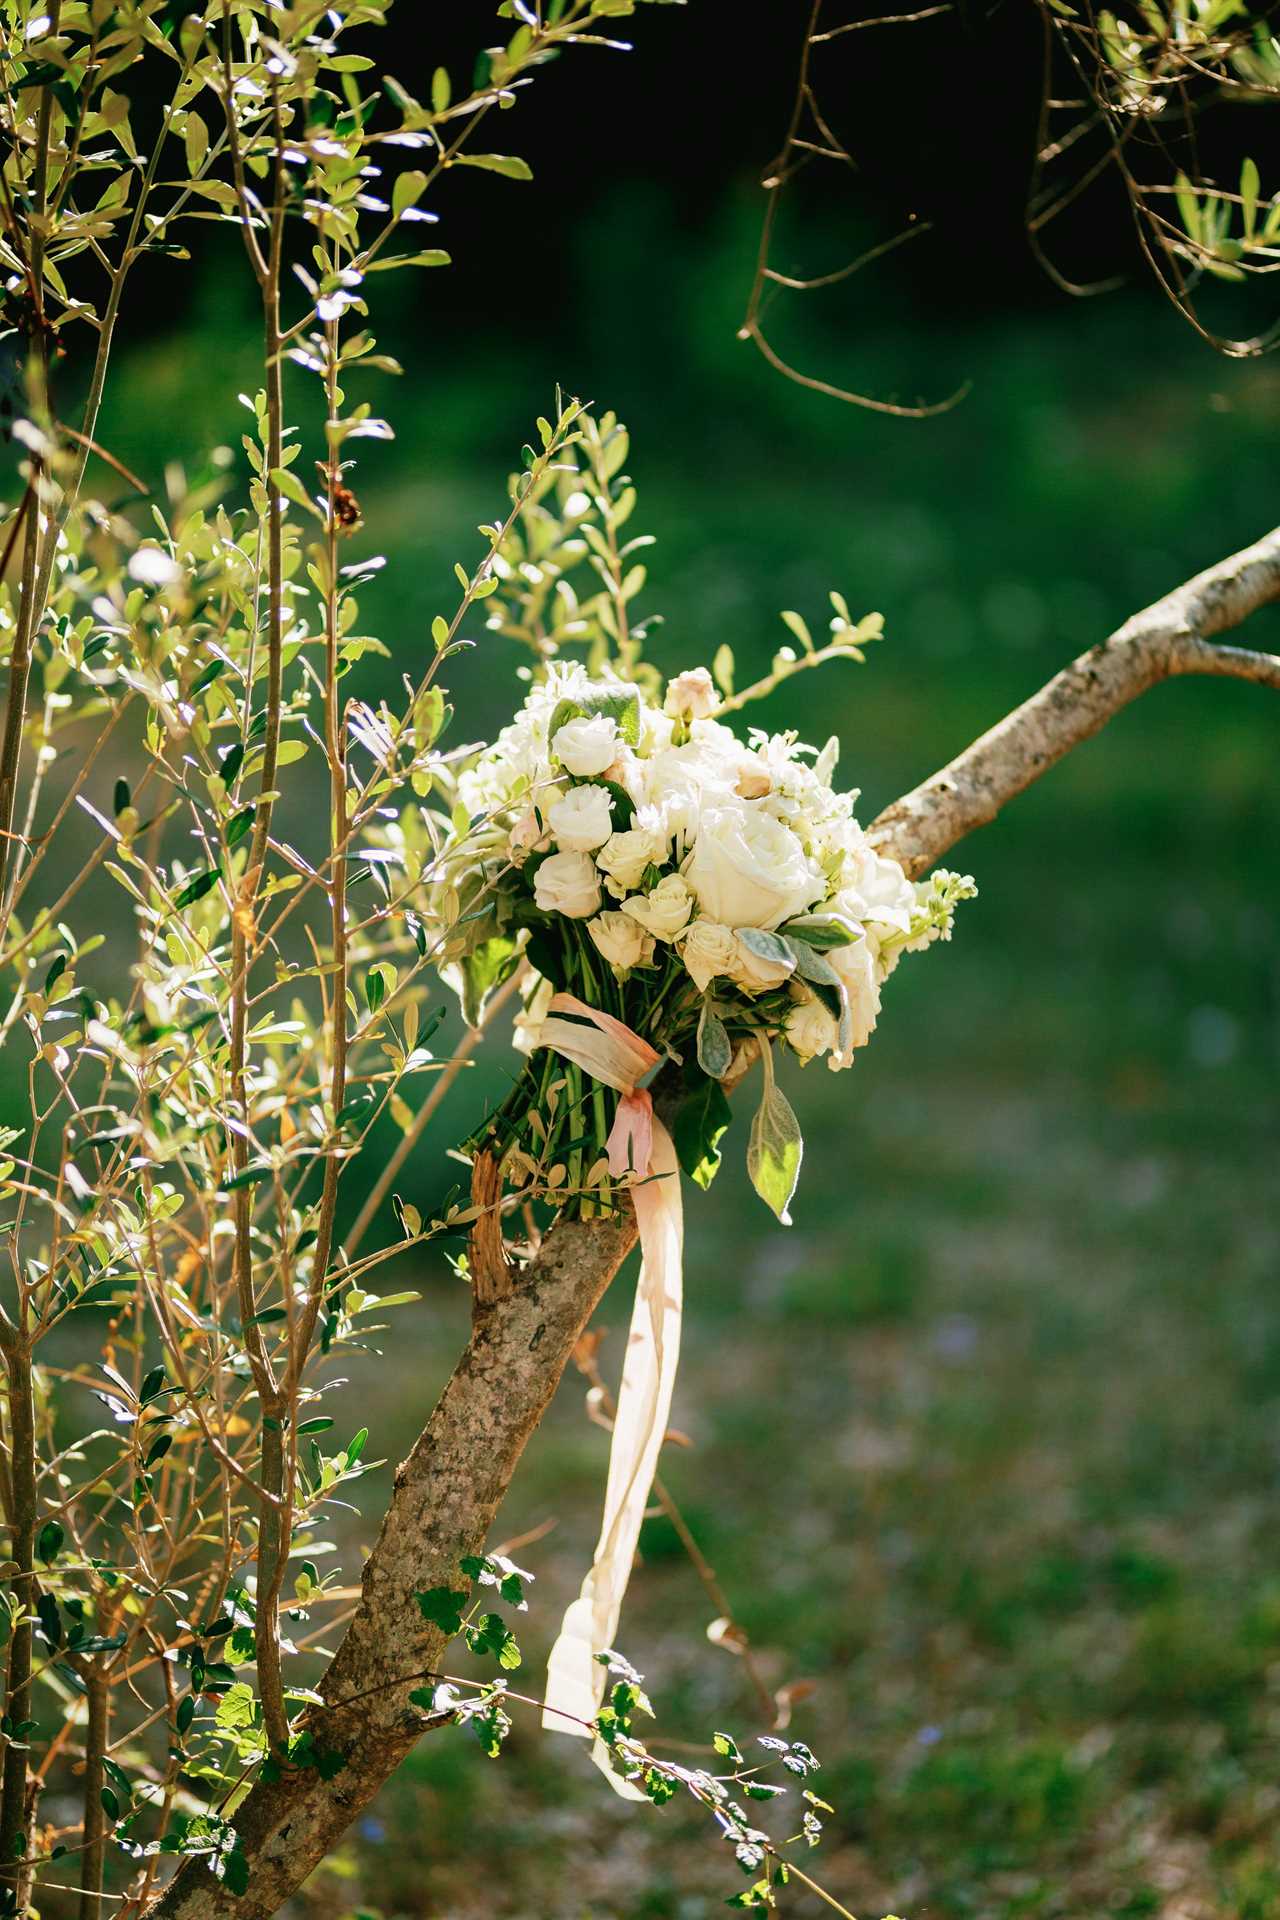 bridal bouquet of white roses, calla lilies, honeysuckle flowers, stachys and white ribbons on the olive tree